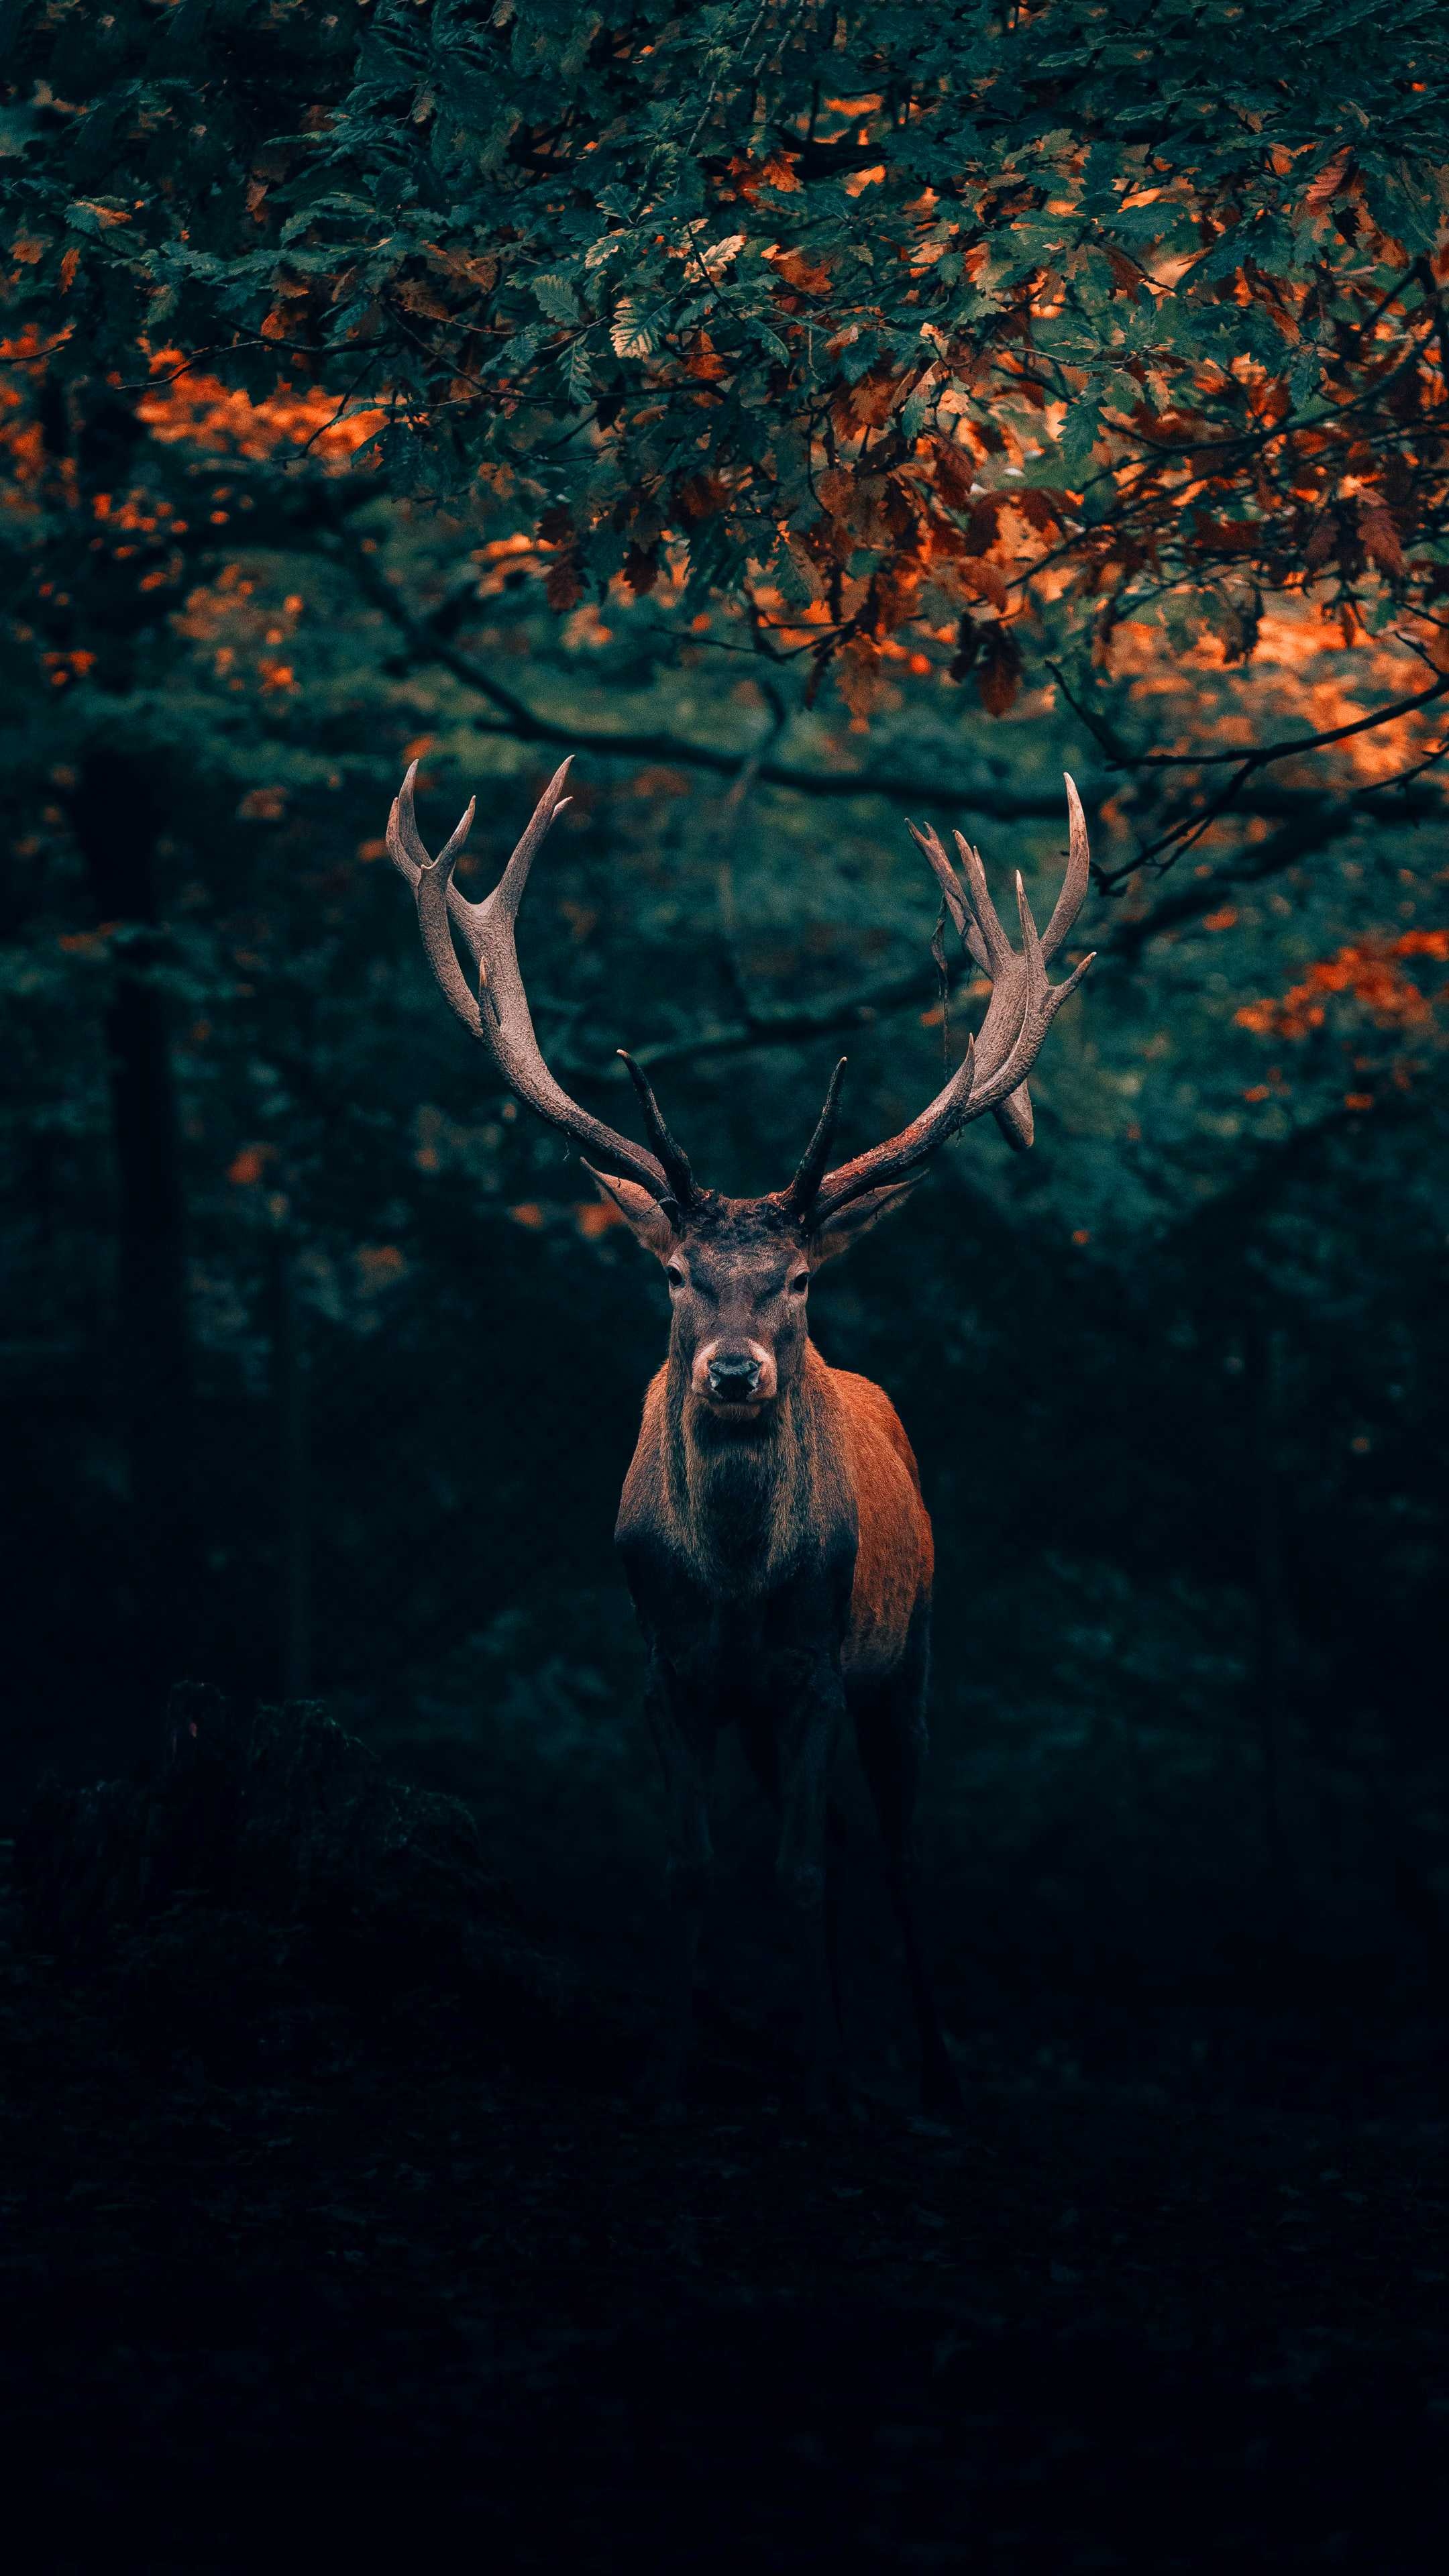 Majestic deer, Artistic wallpapers, Natural elegance, Photography masterpieces, 2160x3840 4K Handy